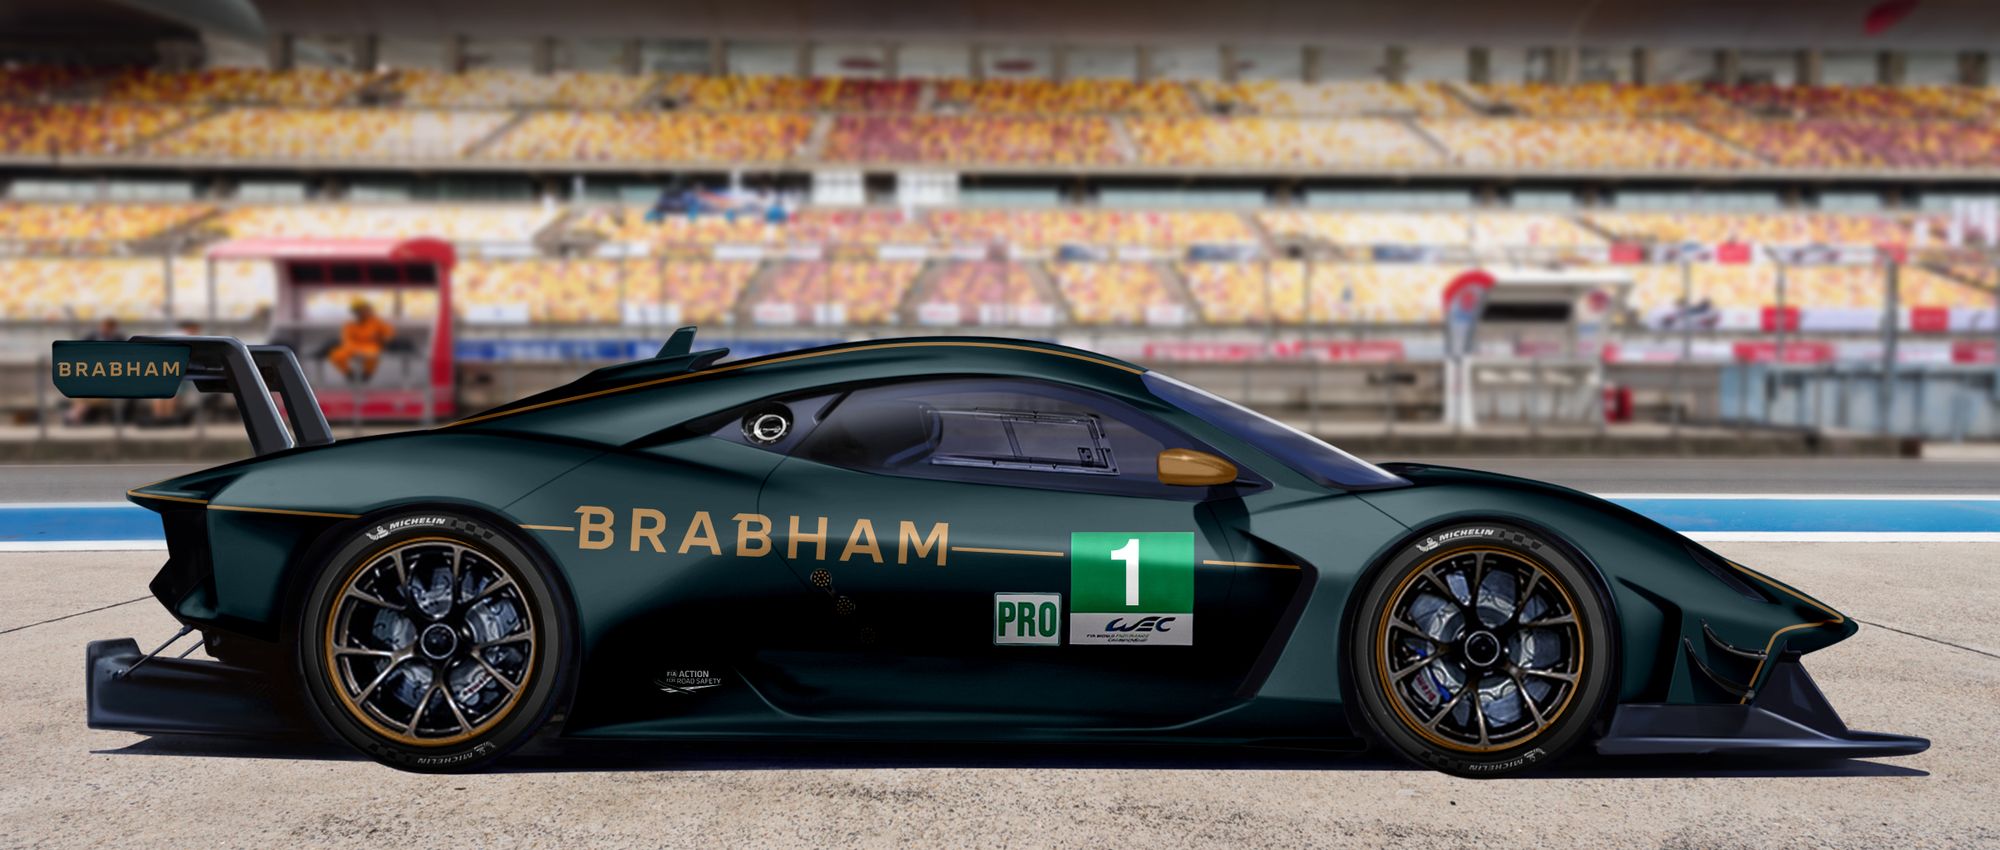 The Brabham Name Will Return To Racing With A WEC Programme